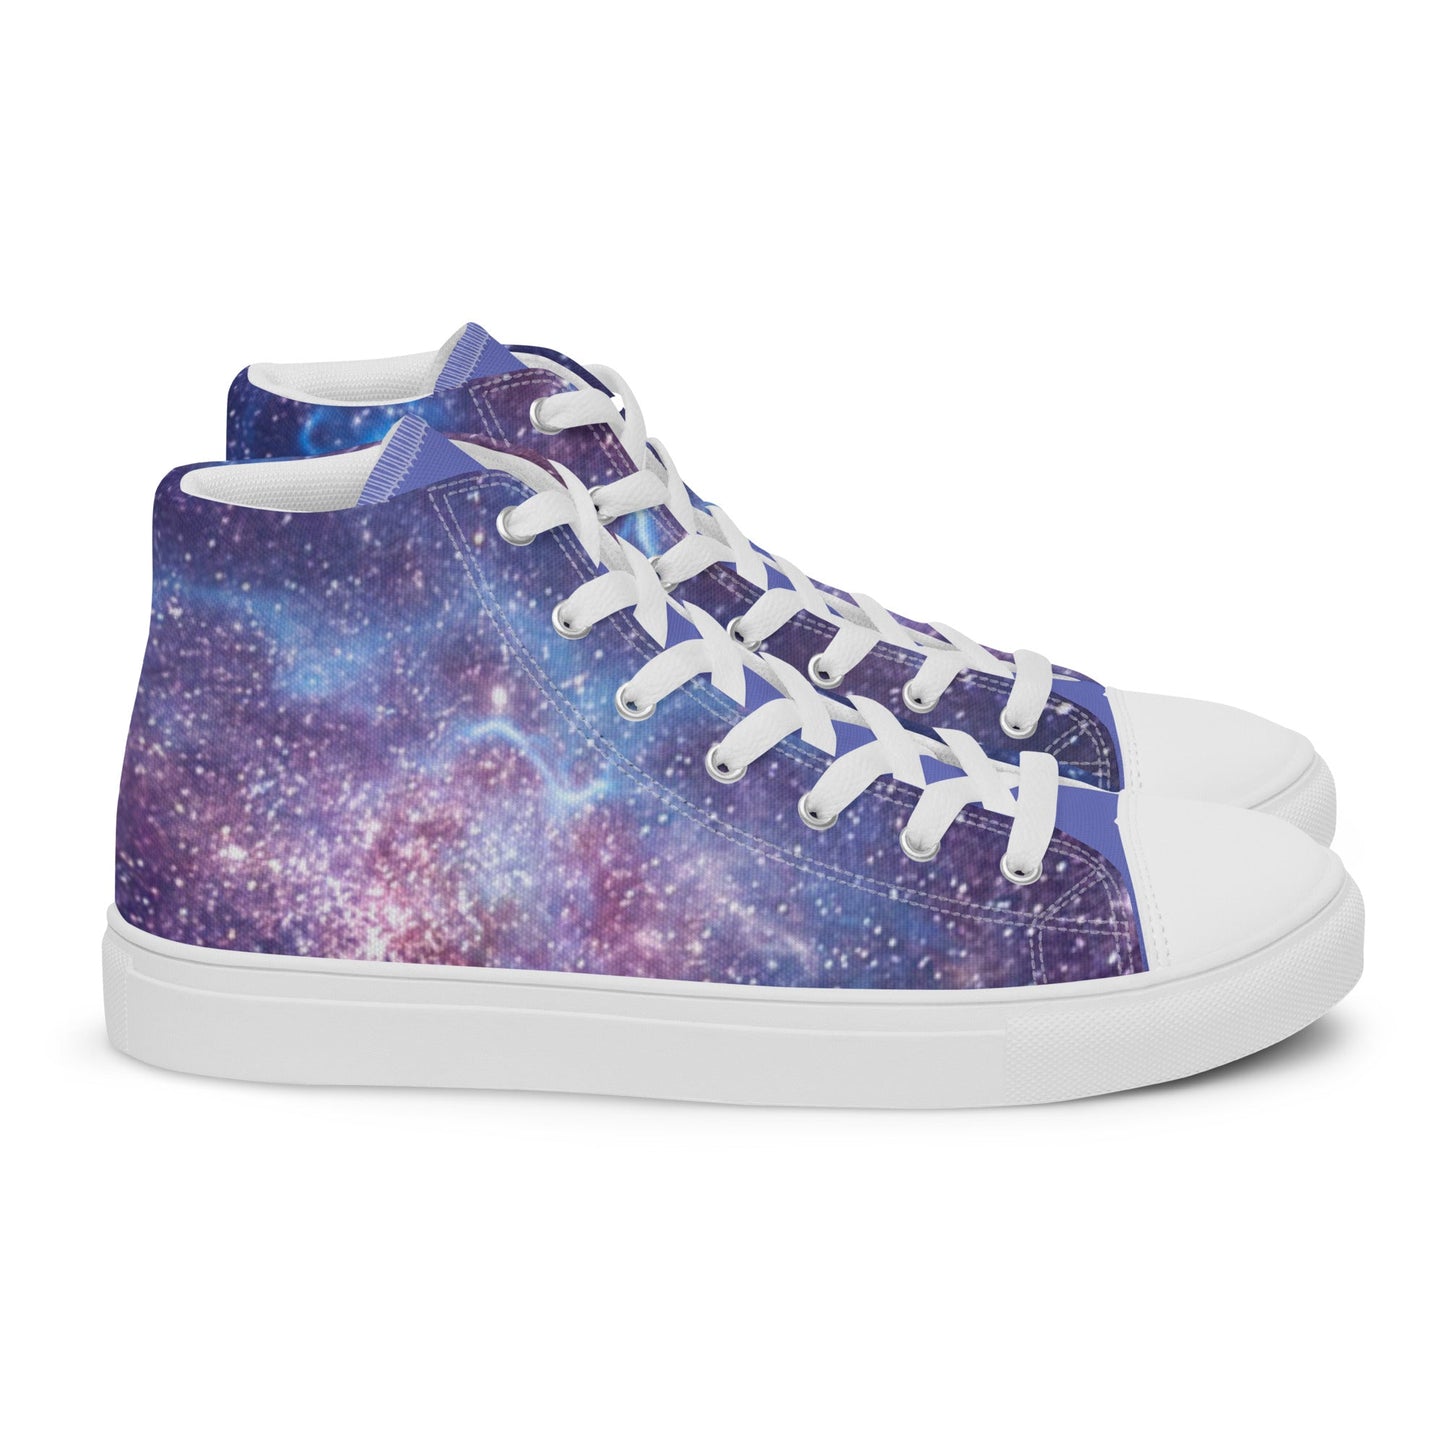 Men’s Blue Galaxy Sneakers-DoggyLoveandMore